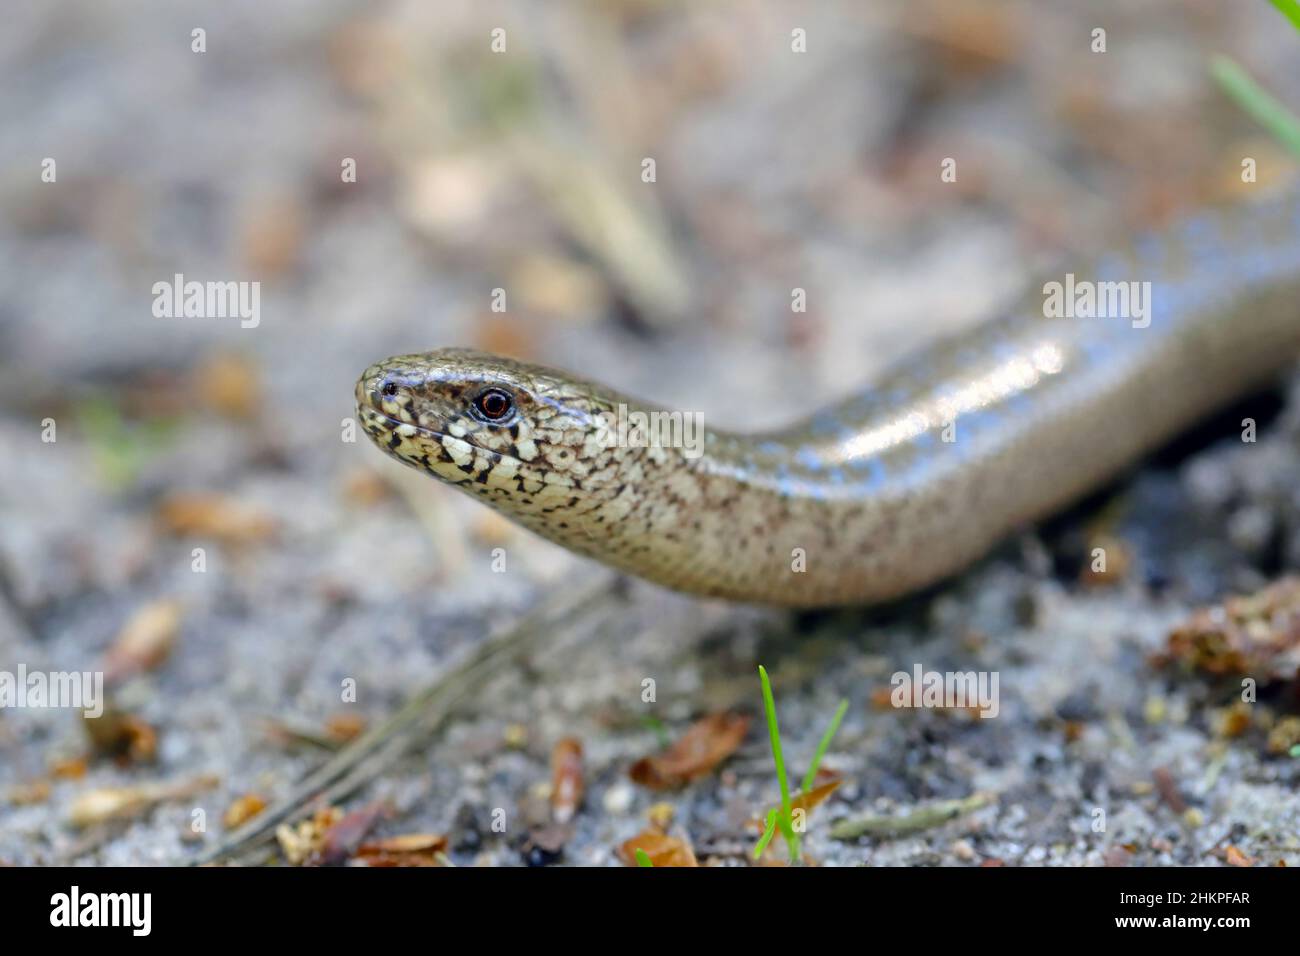 A juvenile Anguis fragilis, also known as a slow worm, slowworm, blind worm or glass lizard, and often mistaken for a snake. Stock Photo